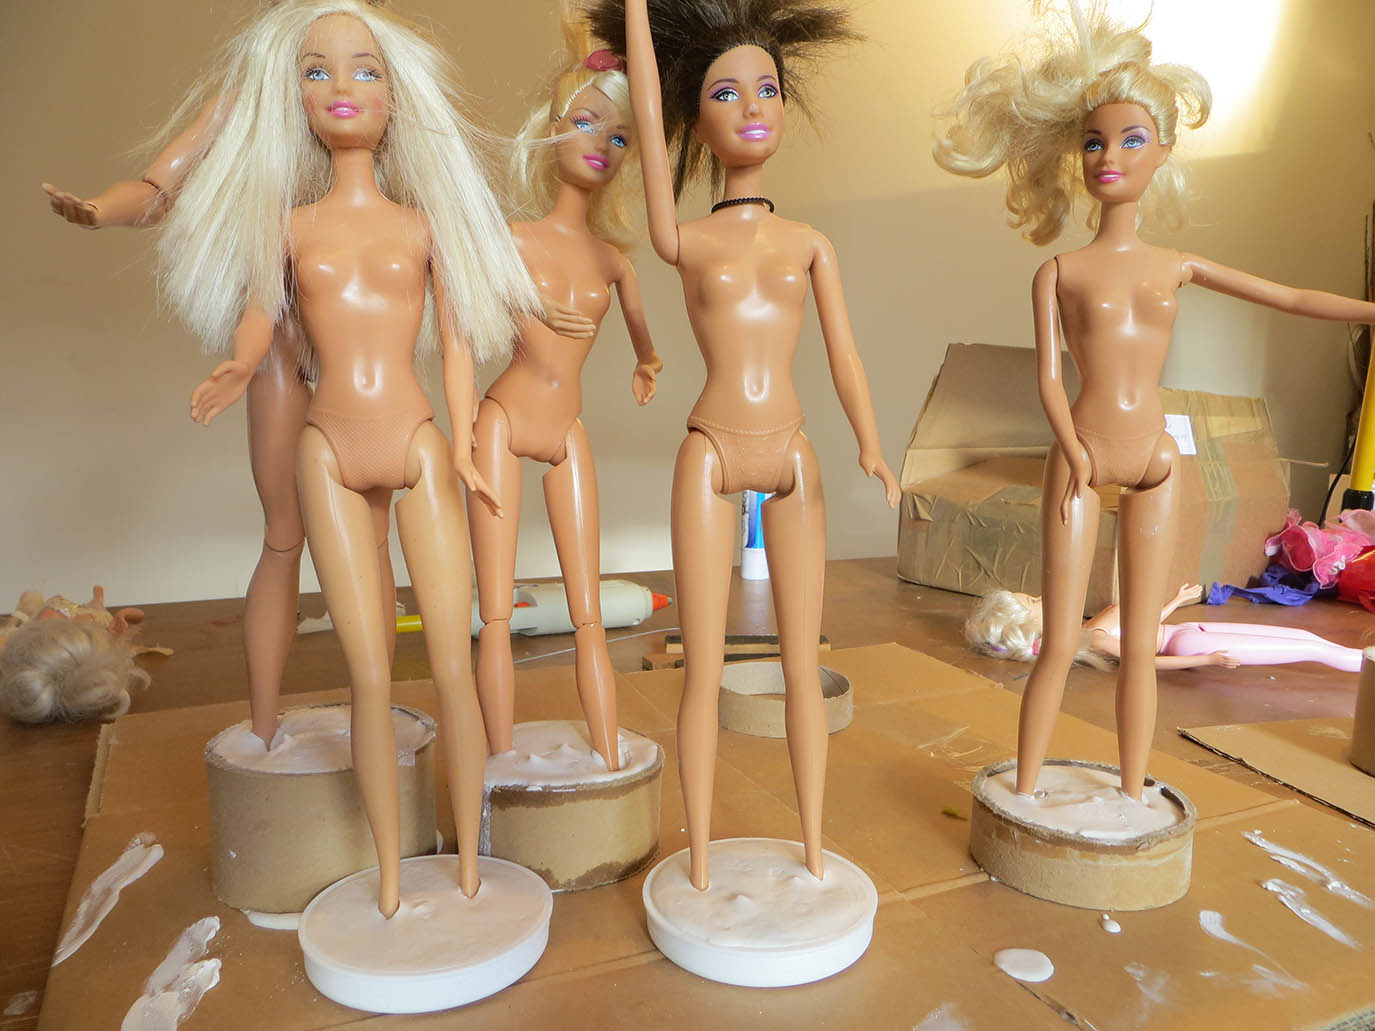 Barbies standing in plaster bases